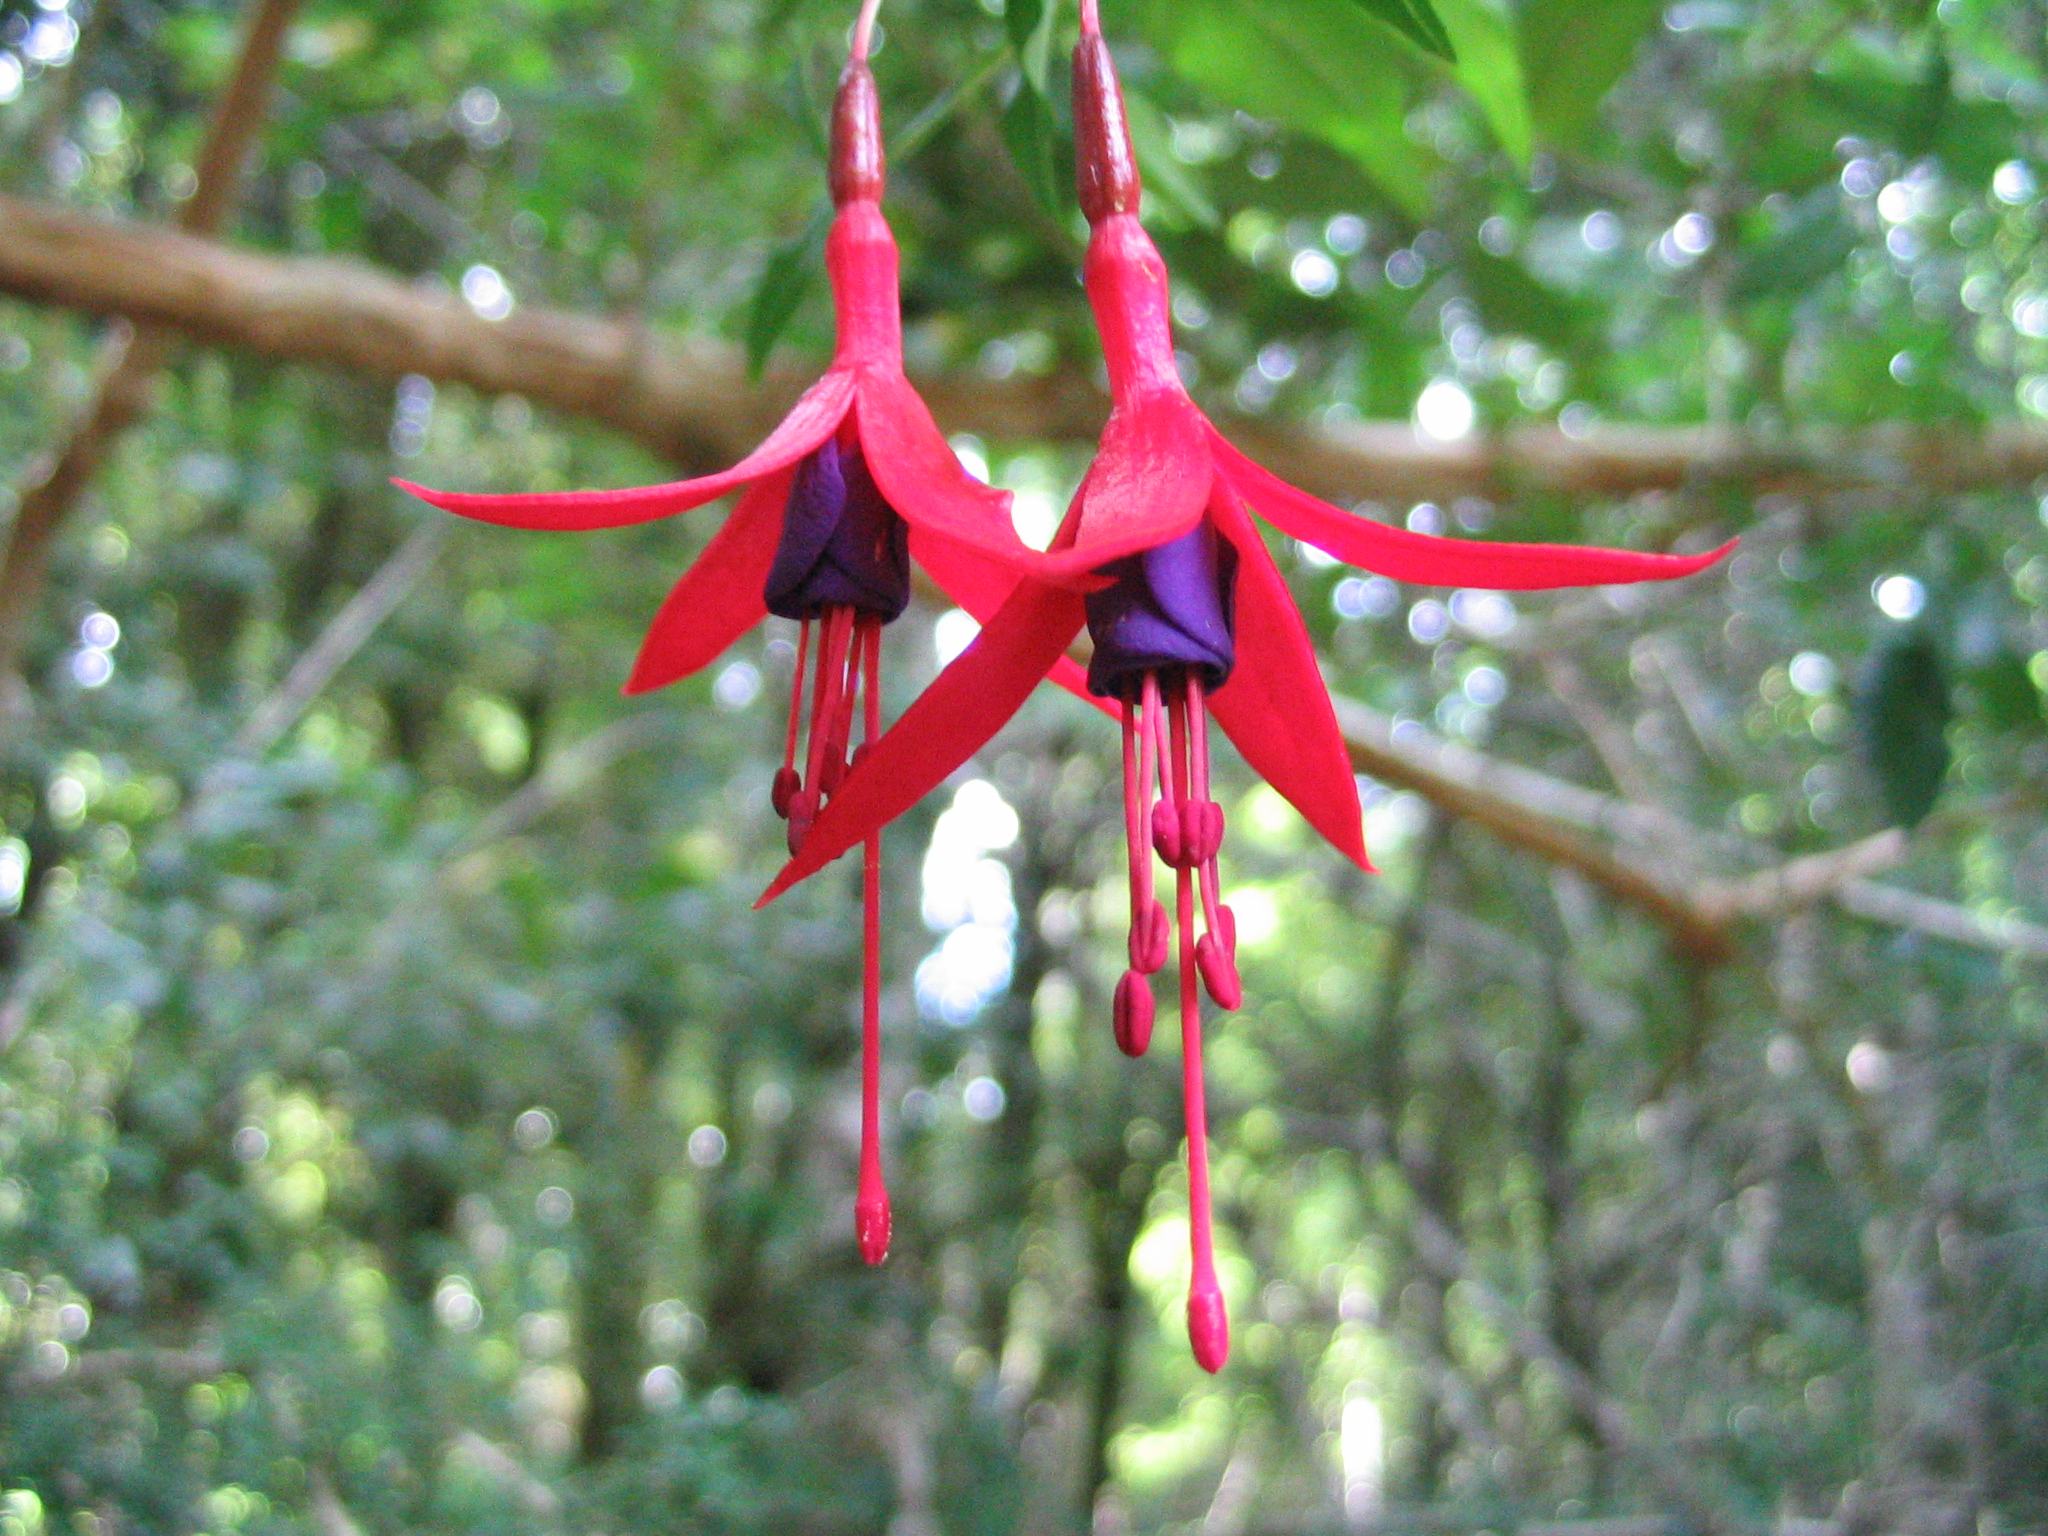 two bright pink fuchsia flowers in front of trees